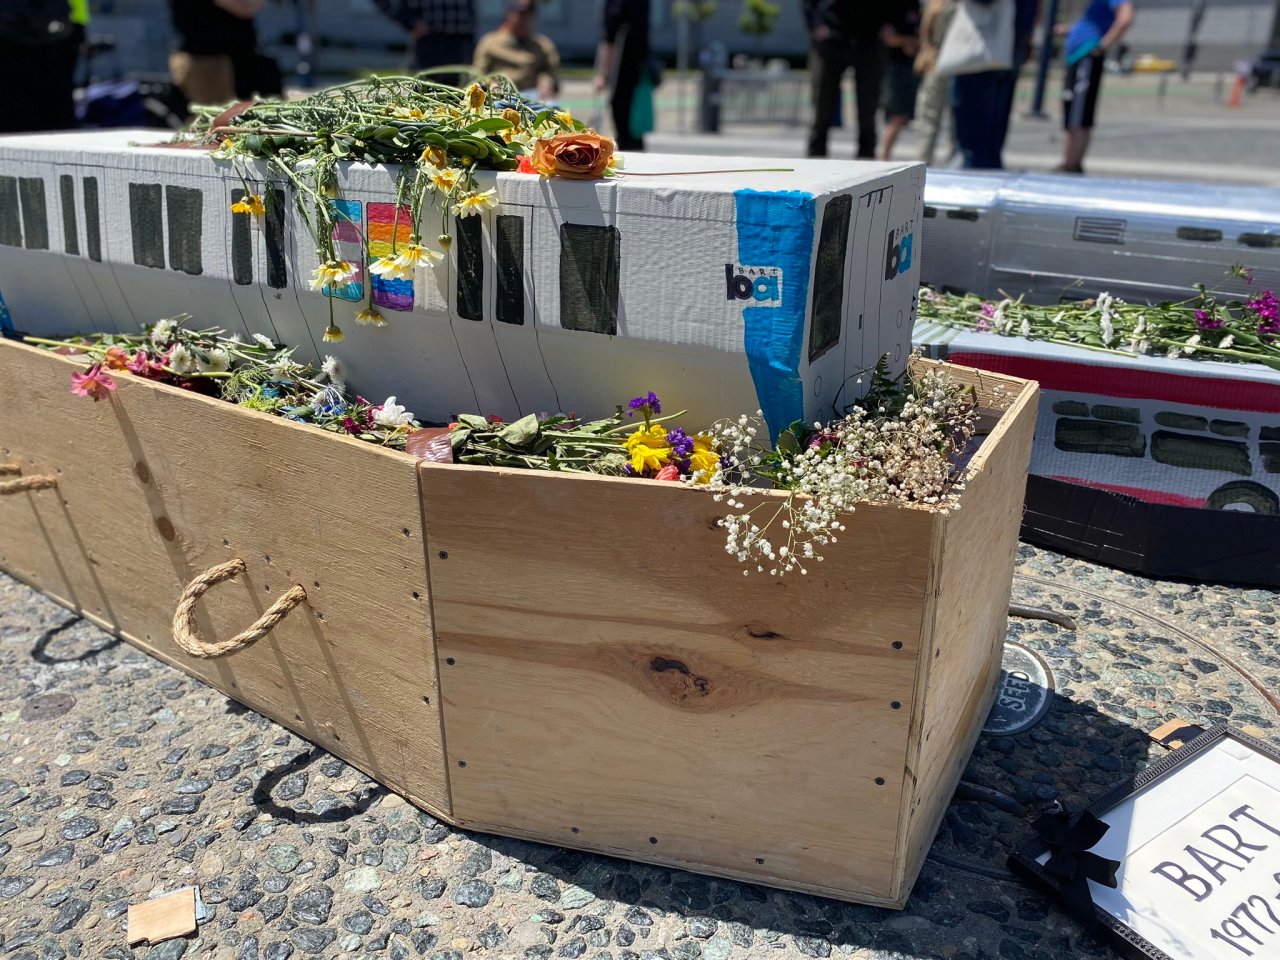 Another pic of the mock funeral, from the advocates at KidSafeSF